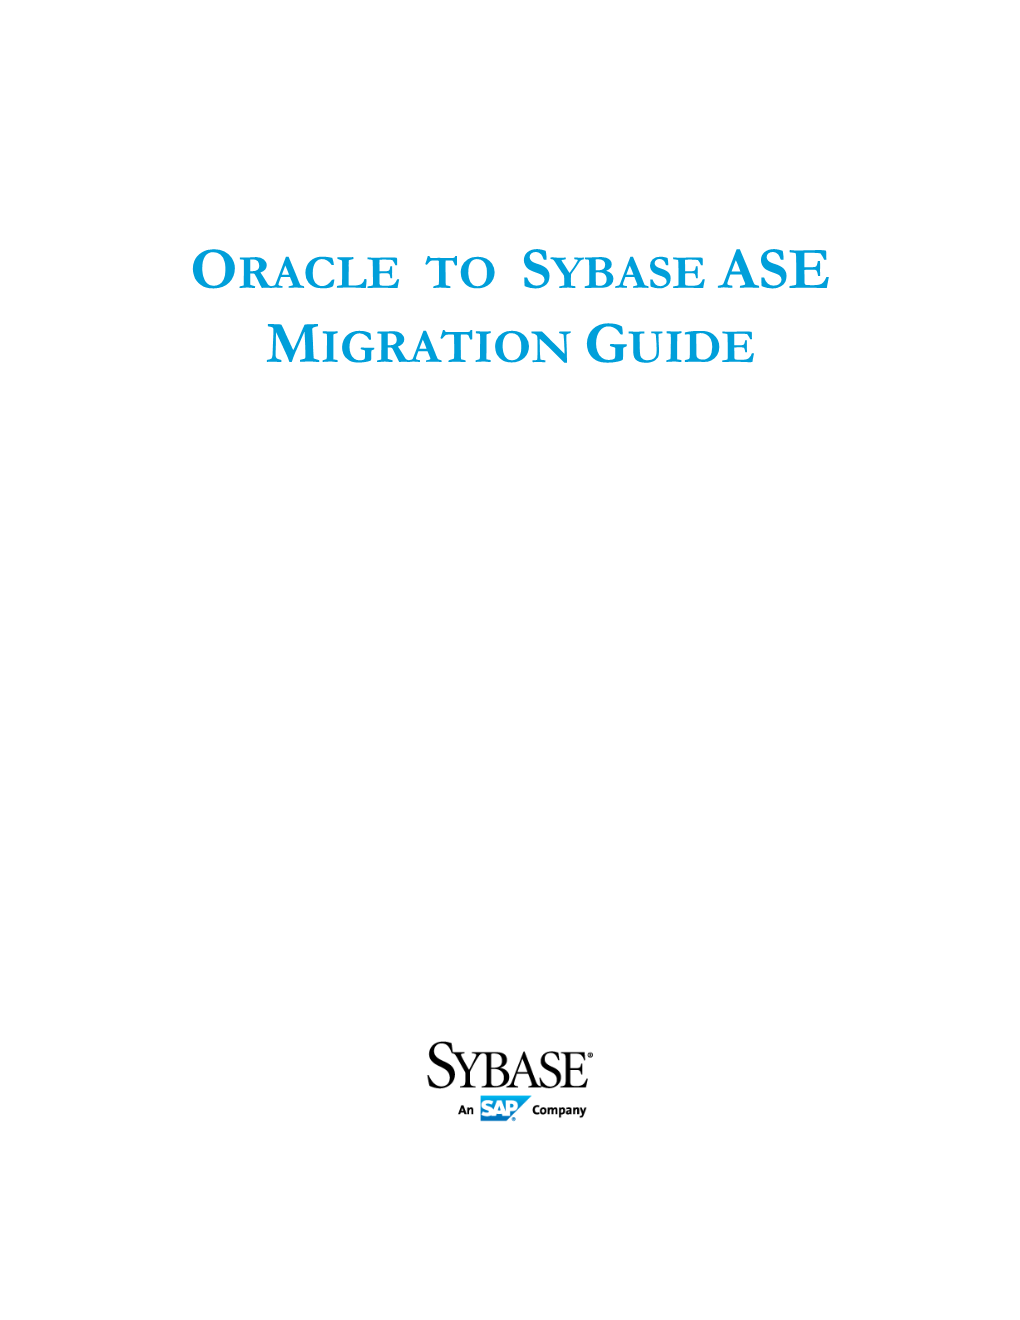 ORACLE to SYBASE ASE MIGRATION GUIDE Rev.1.3